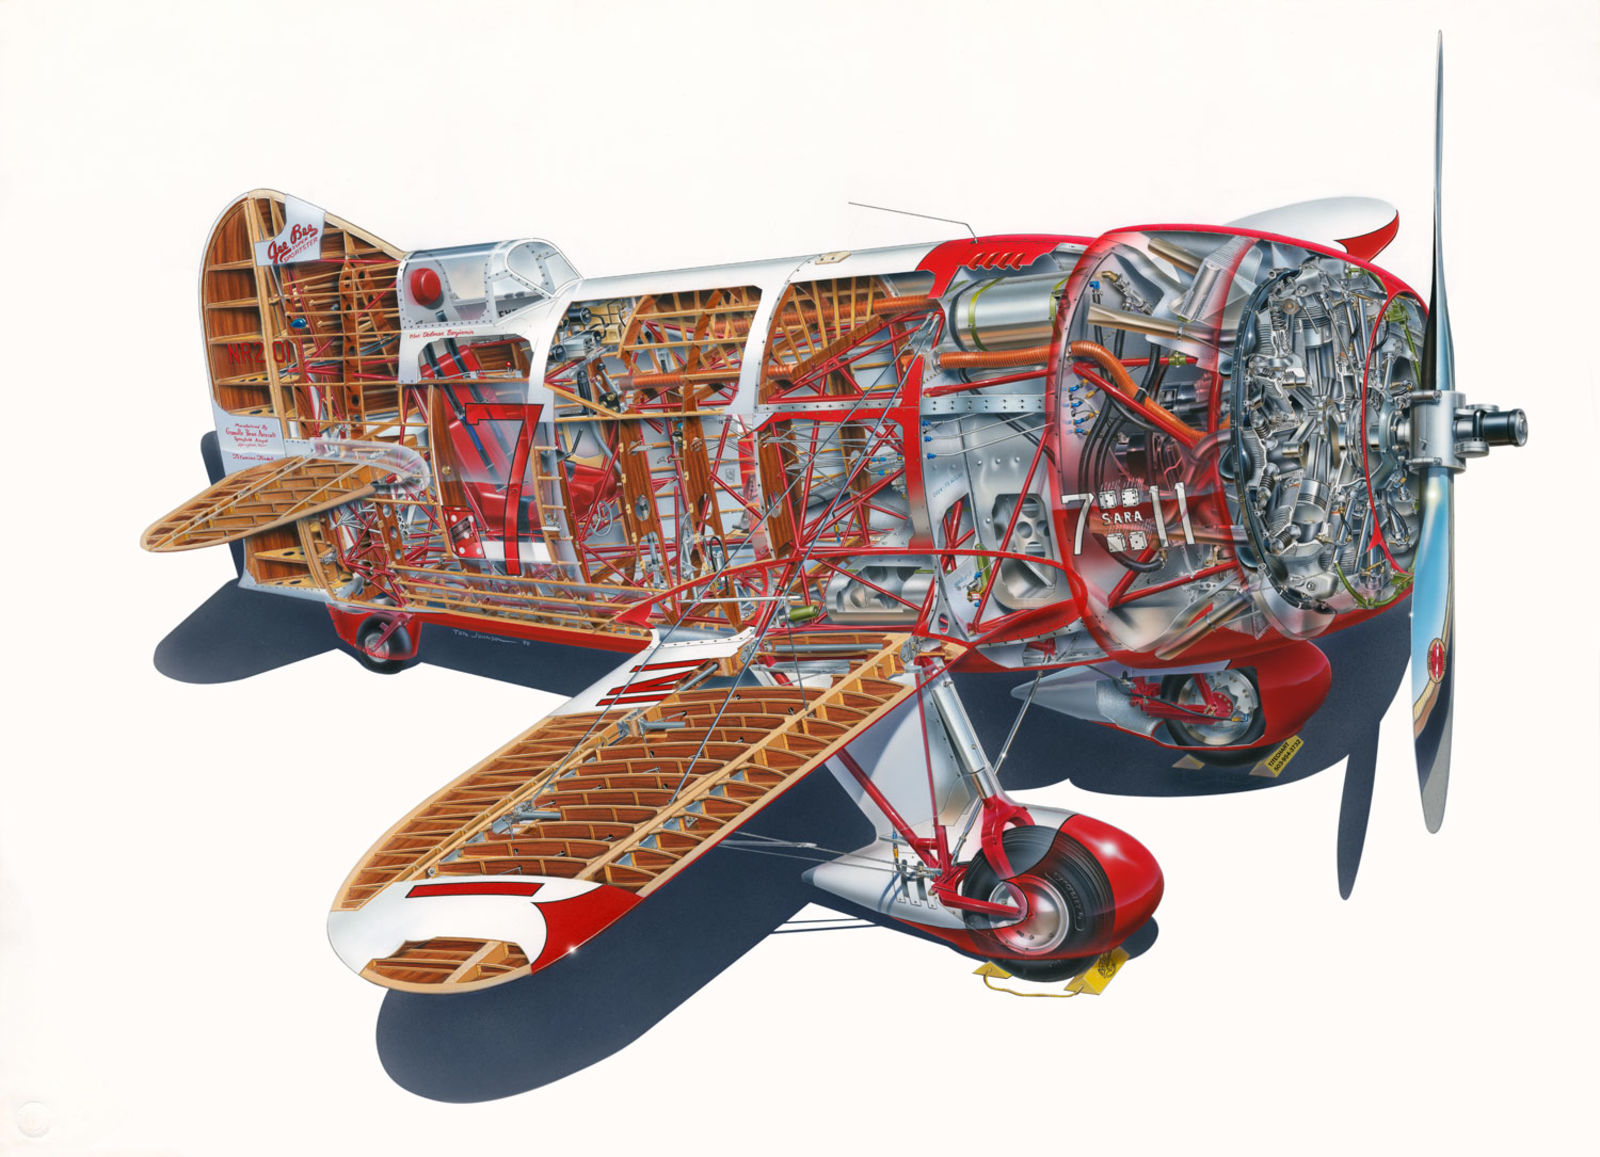 A cutaway of the Gee Bee Model R. (Author unknown)